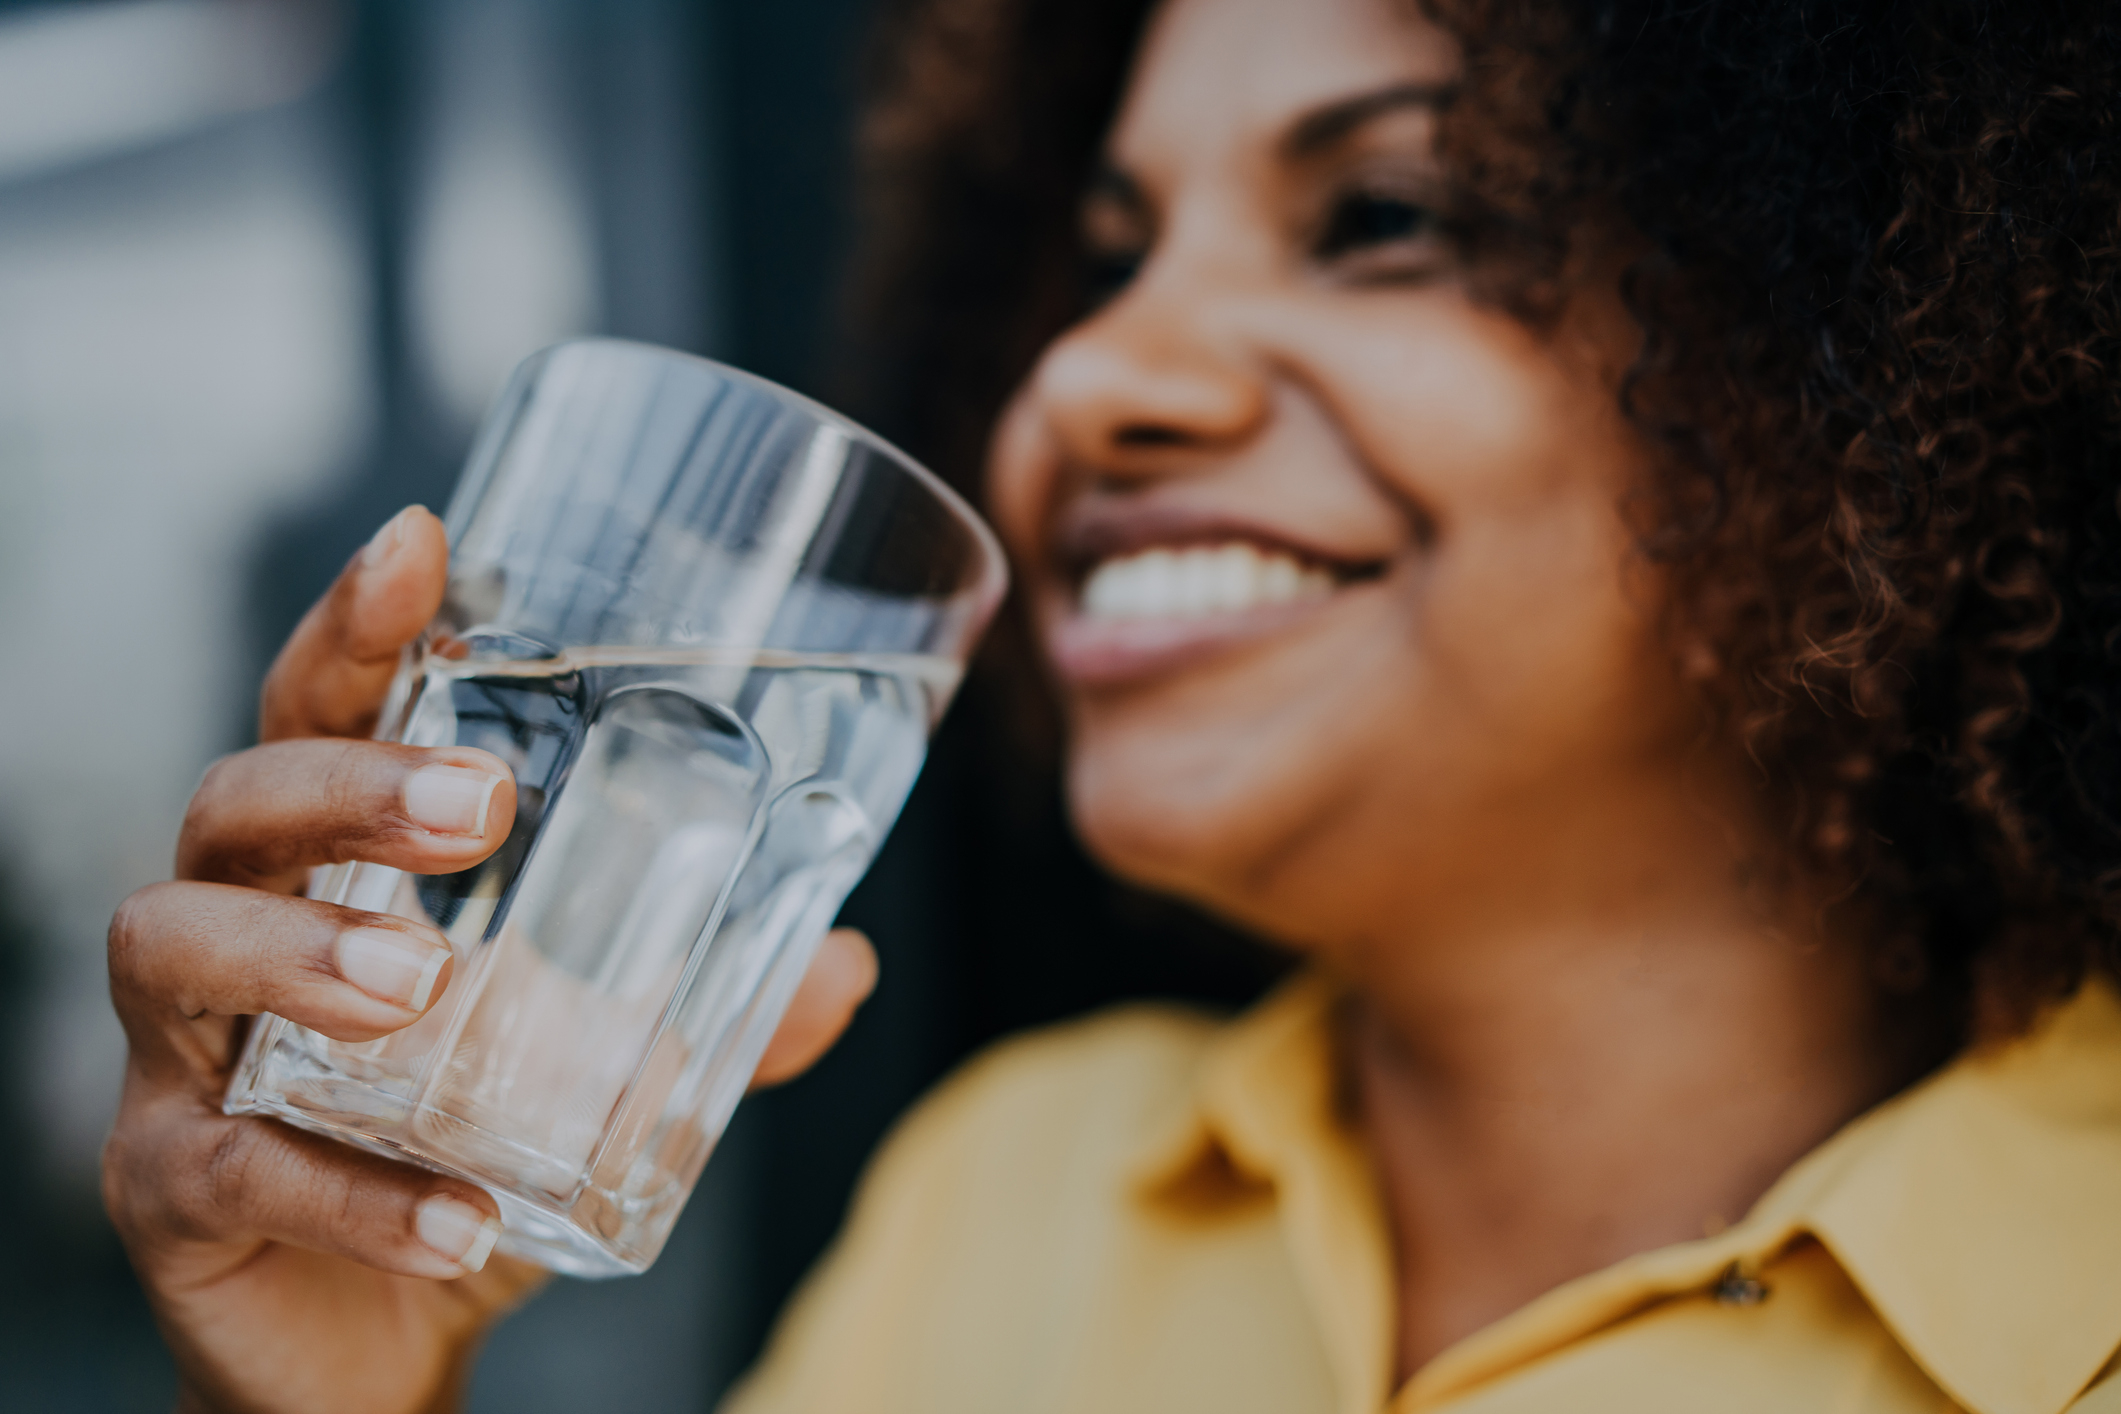 A person is smiling while holding a glass of water close to their face